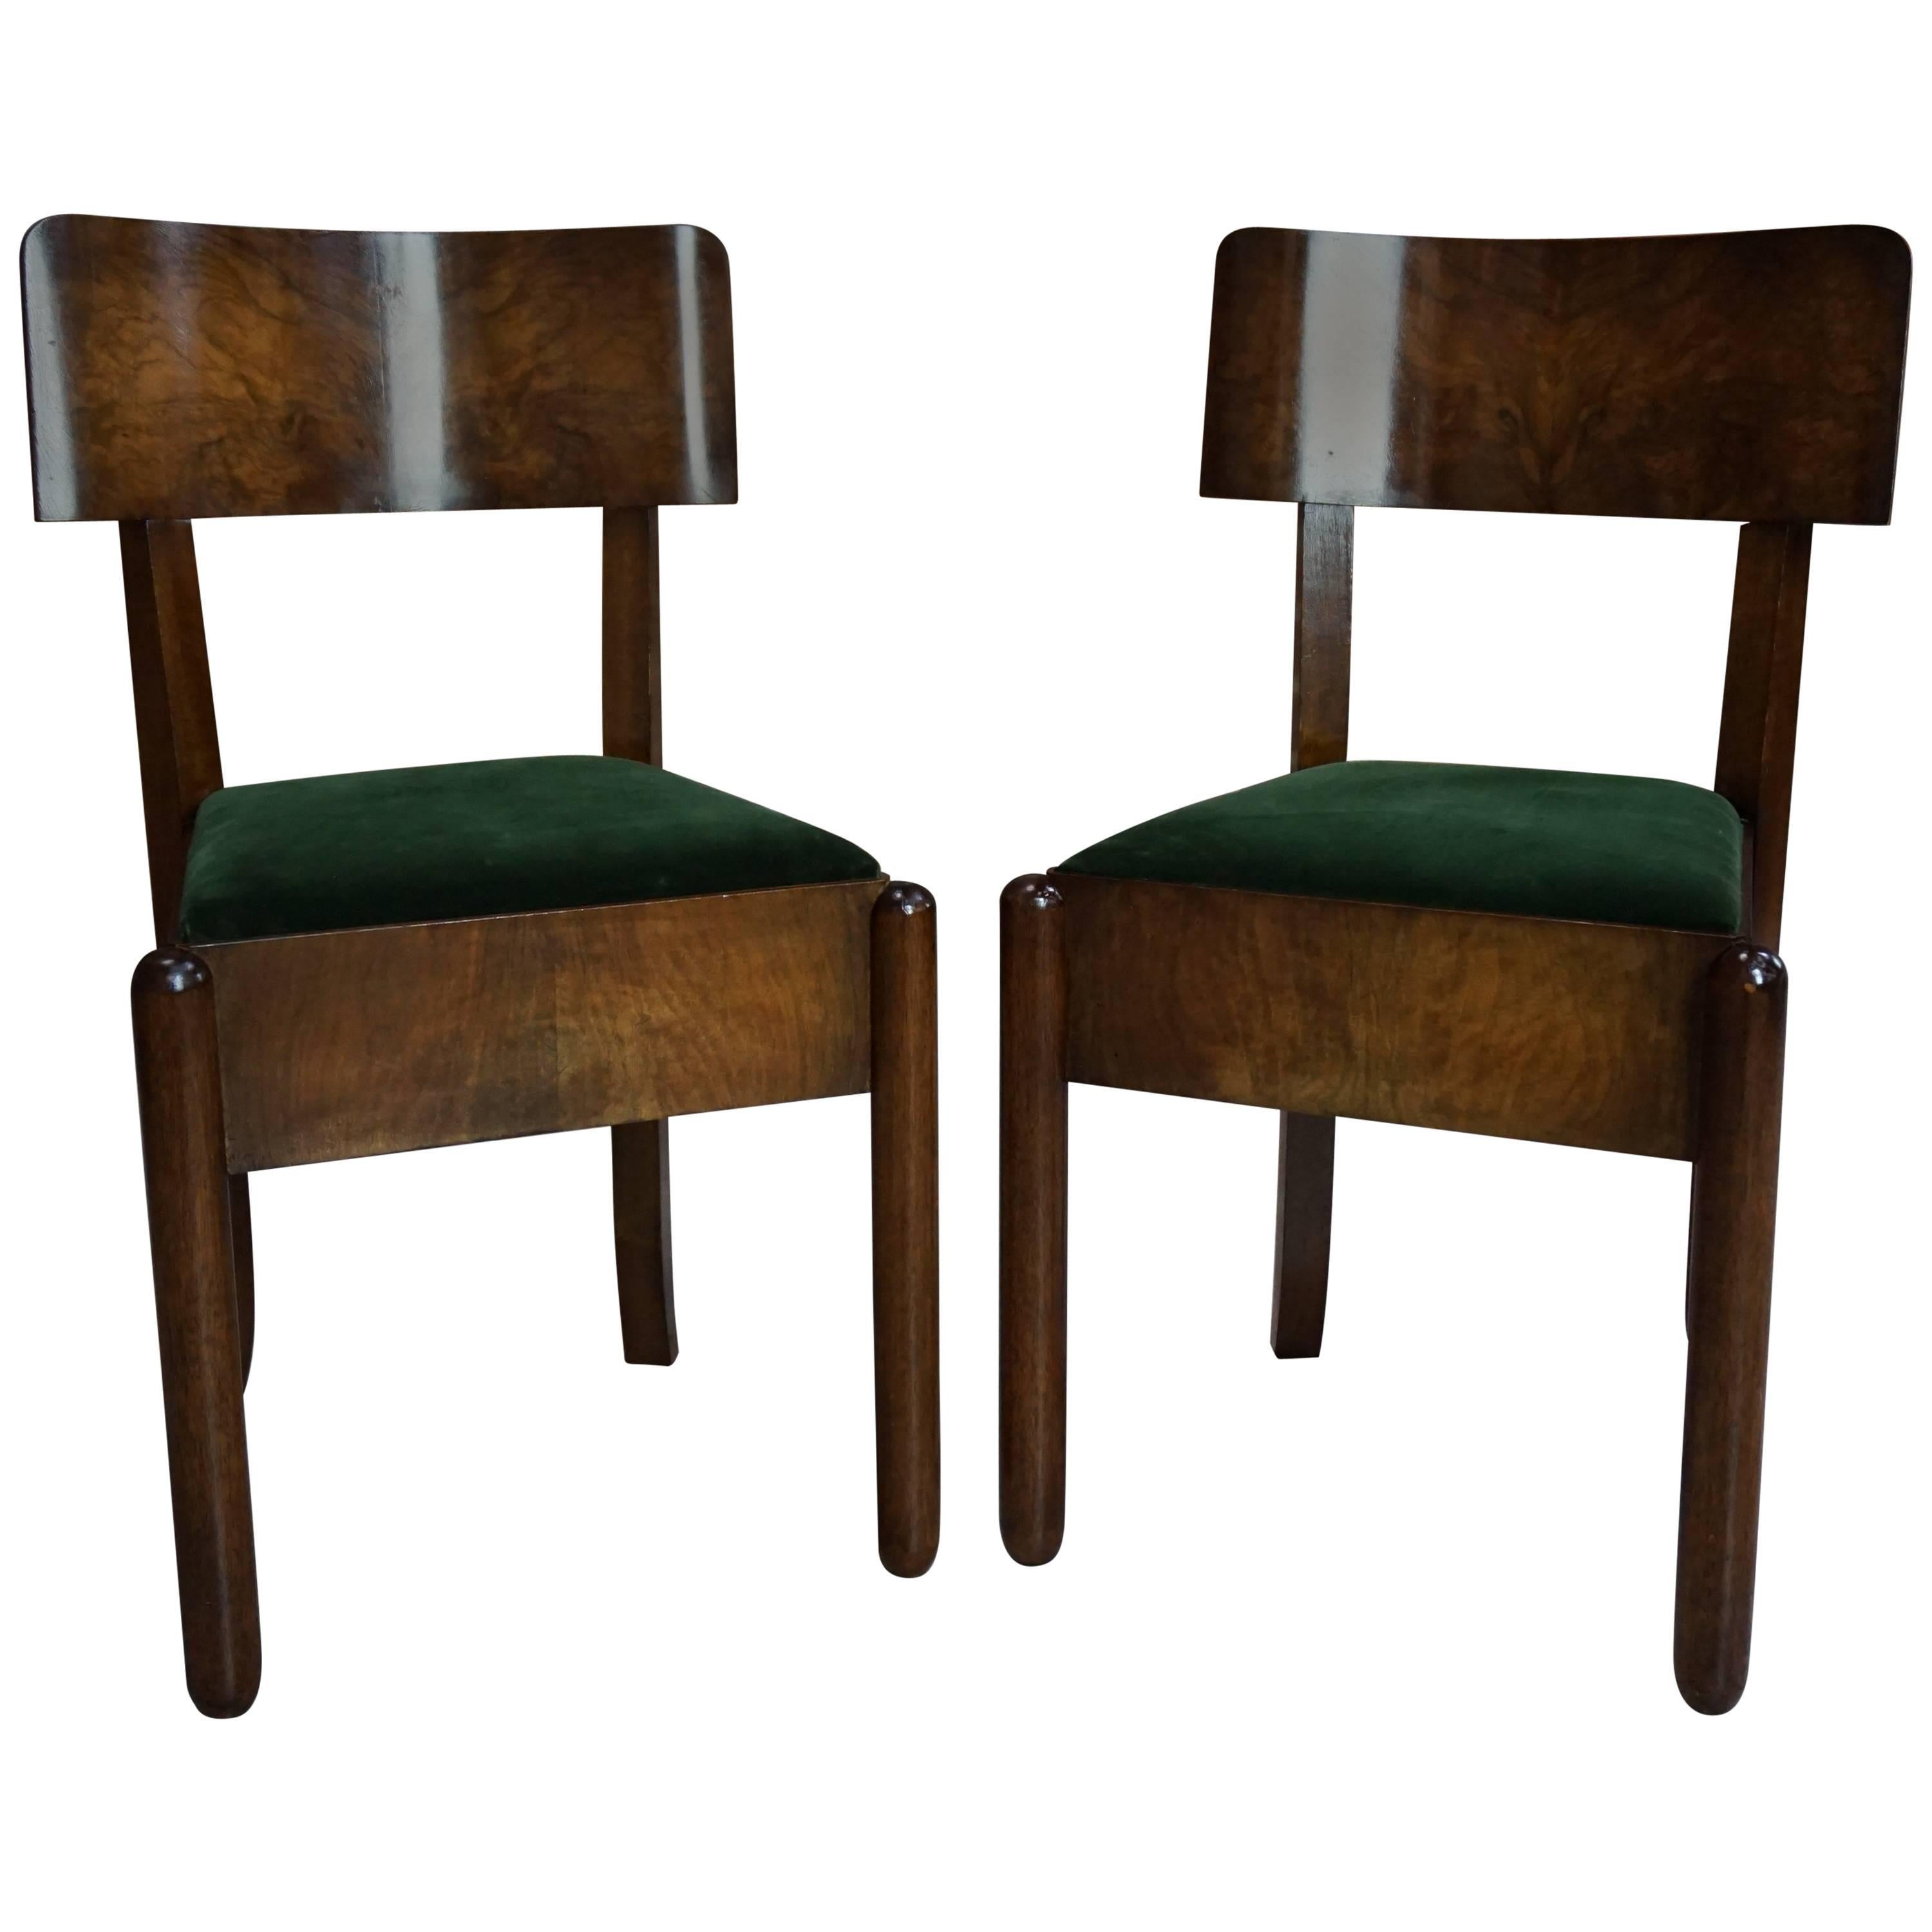 Pair of French Art Deco Chair